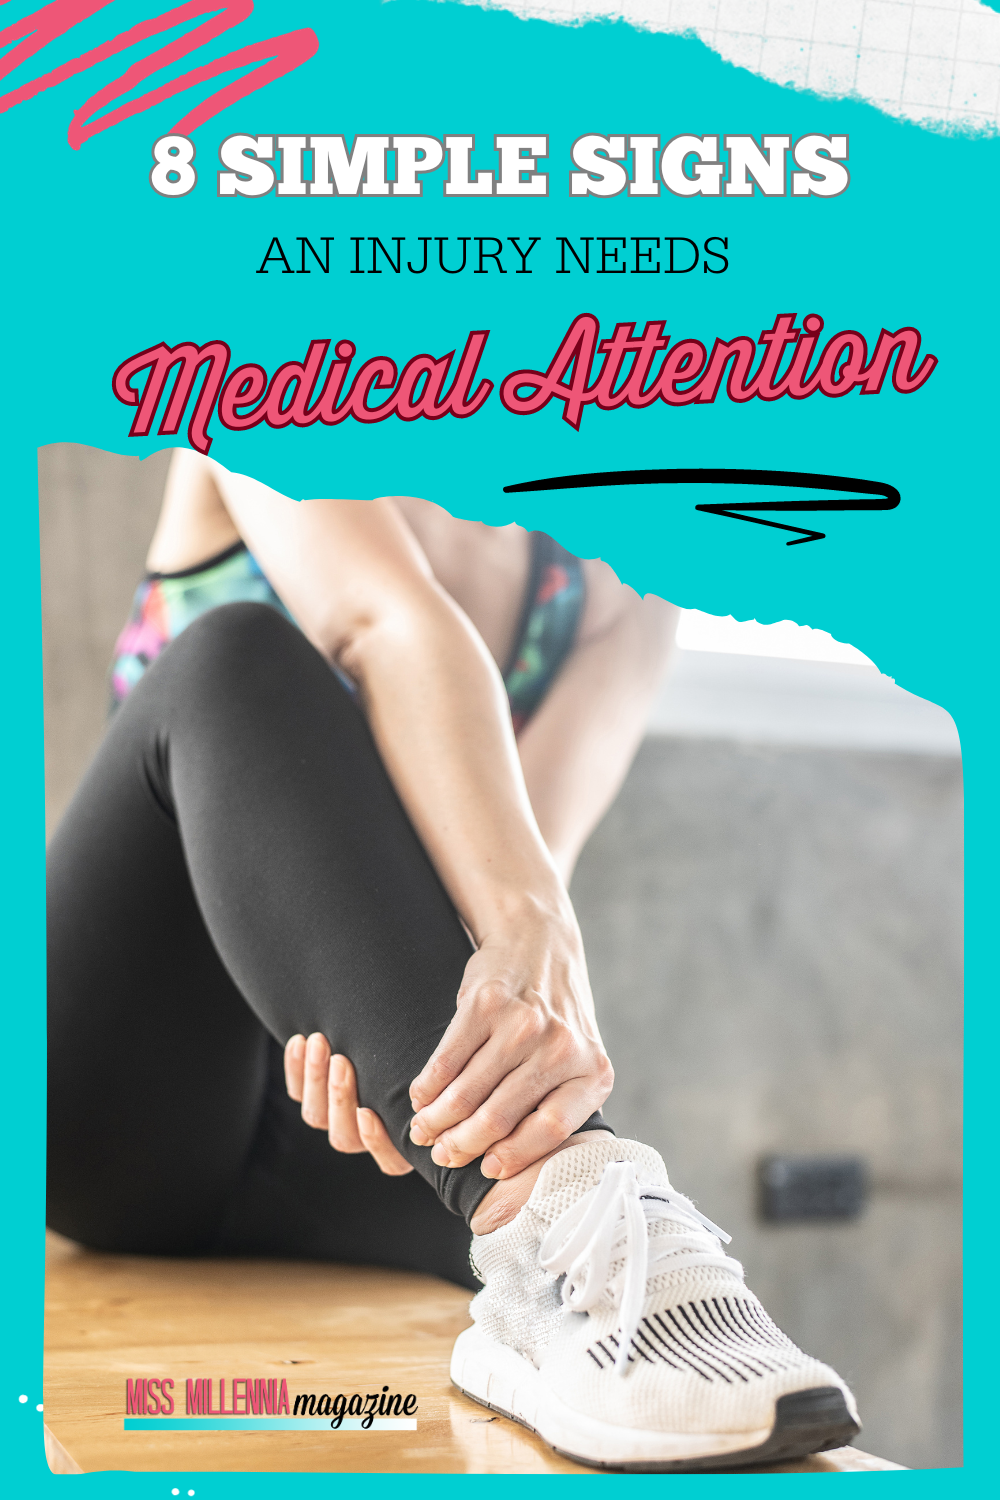 8 Simple Signs An Injury Needs Medical Attention